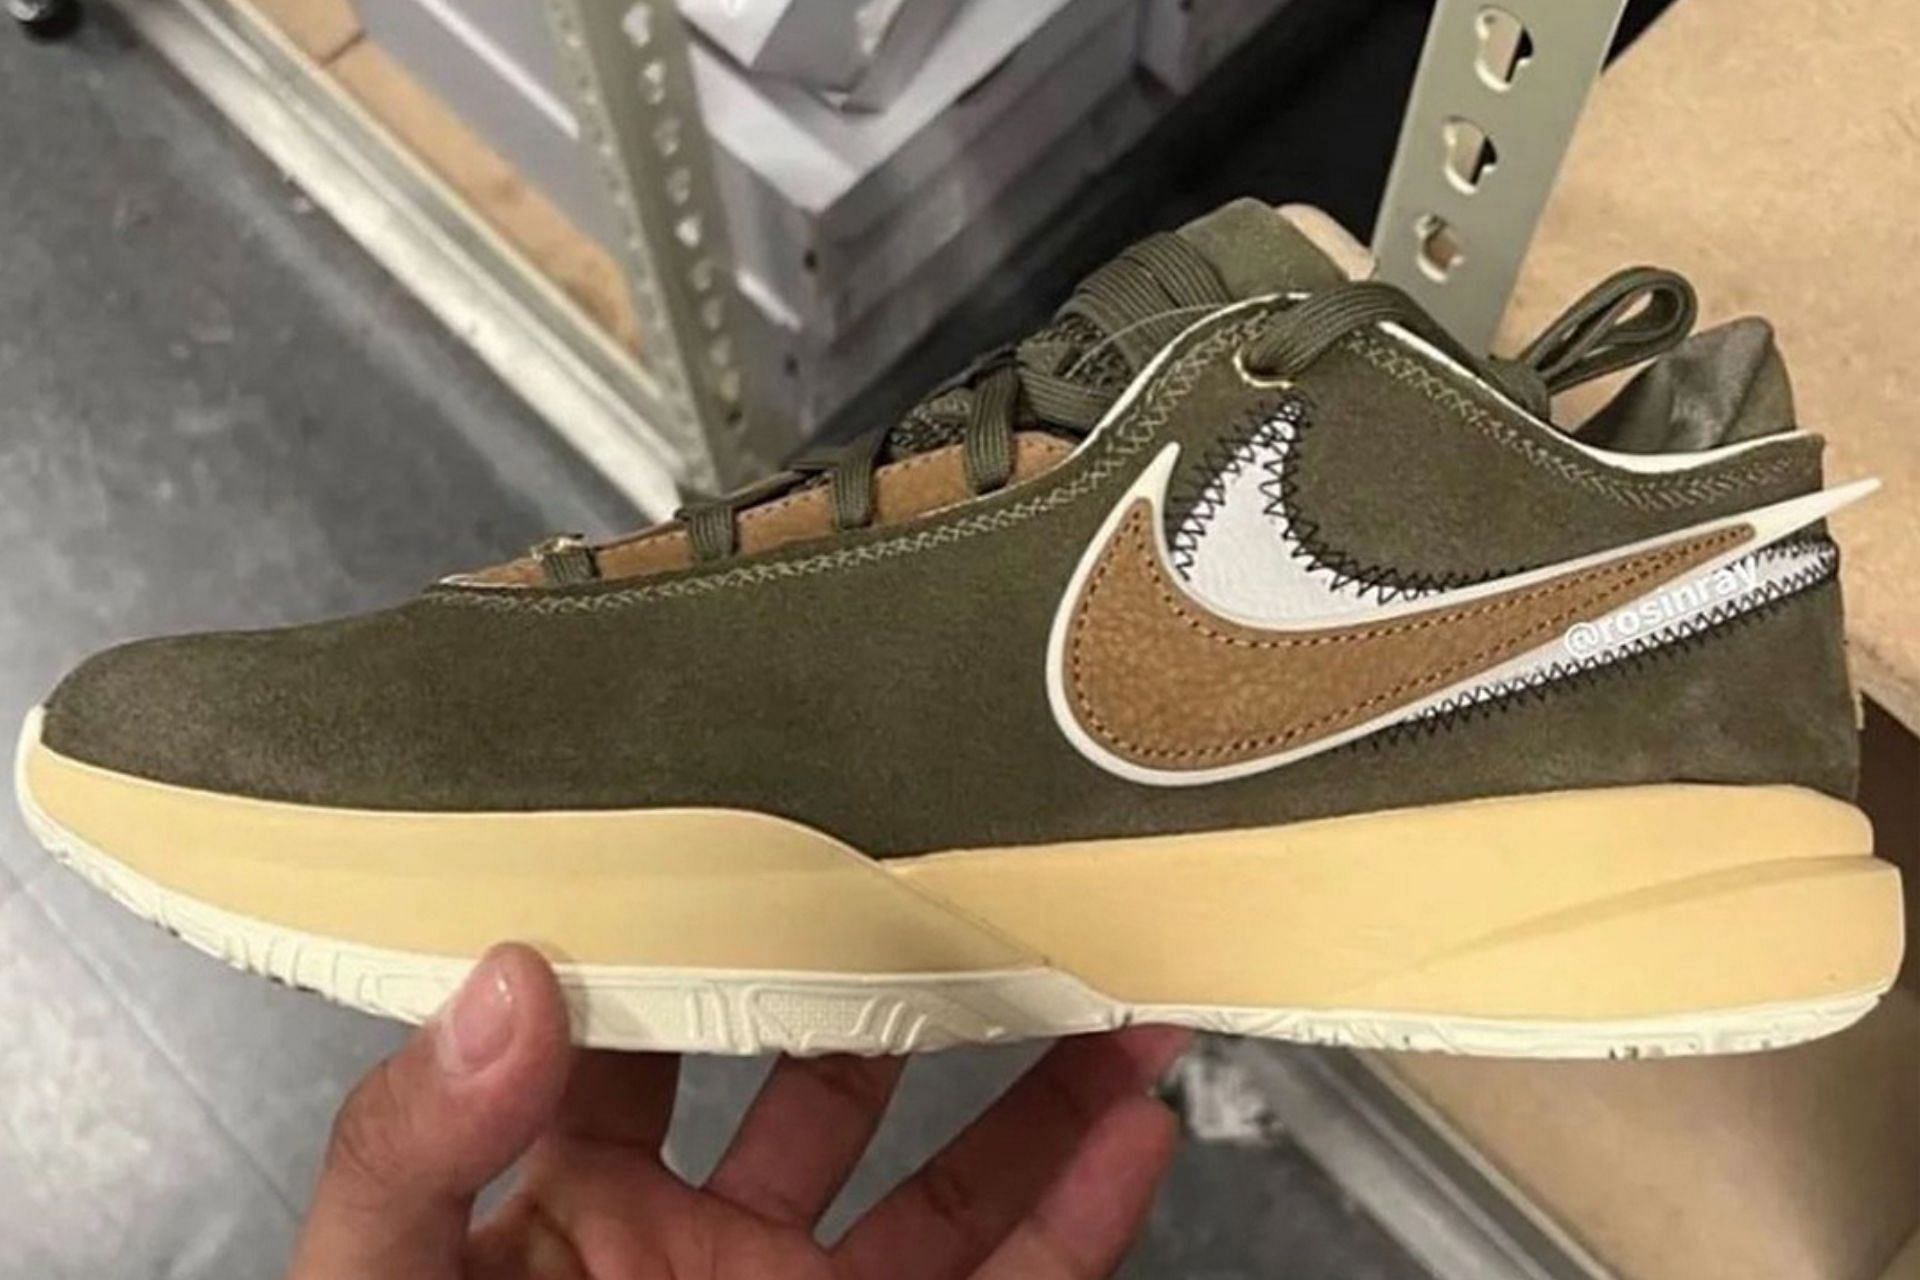 Here&#039;s a detailed in-hand look at the upcoming Nike LeBron 20 Olive shoes (Image via Instagram/@rosinray)